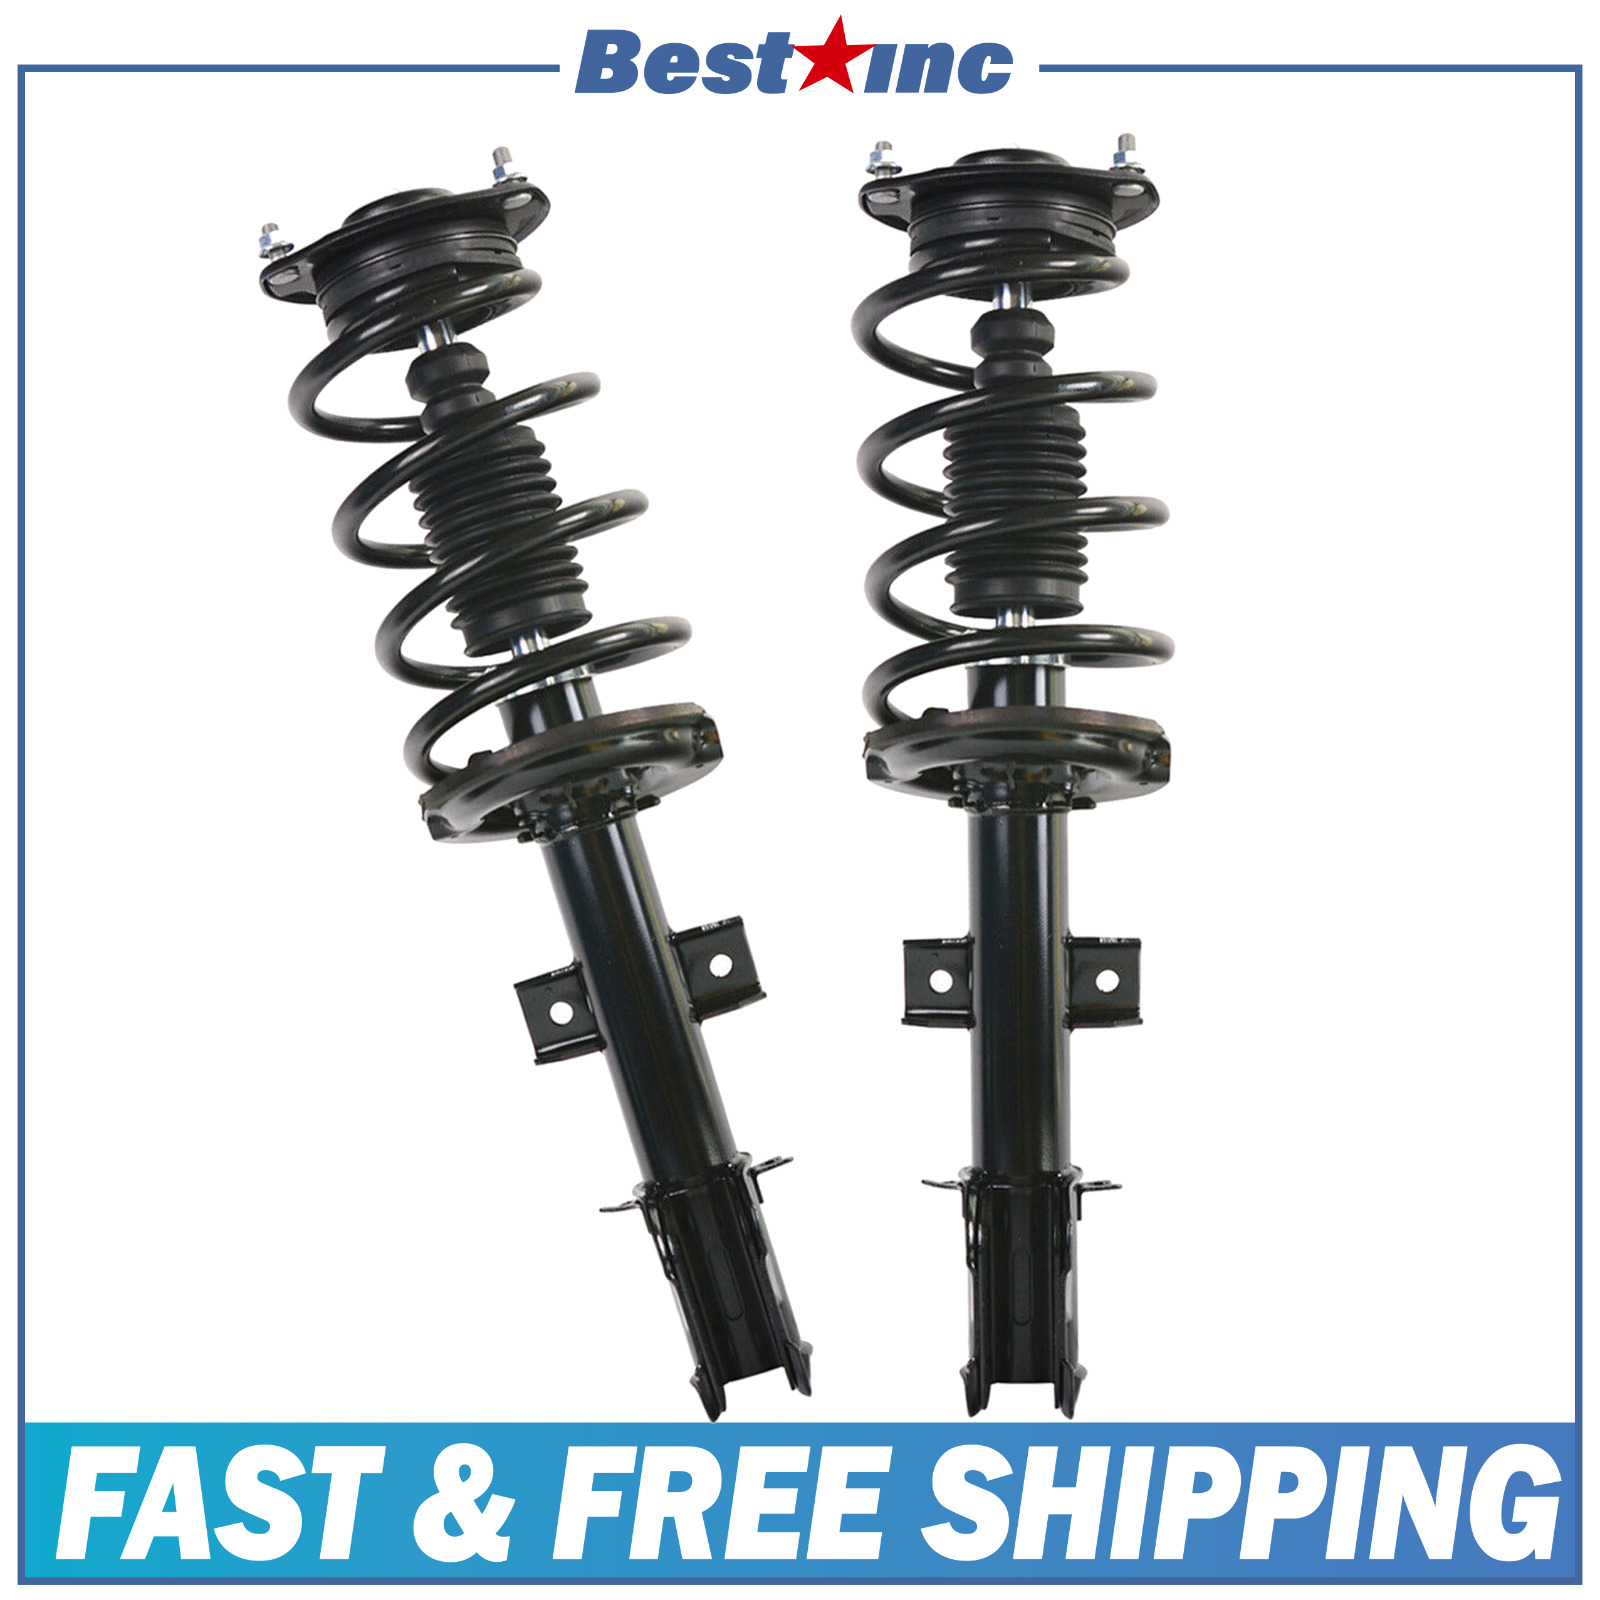 Front Pair (2) Complete Strut Assembly for 2010 2011 2012 Hyundai Santa FE